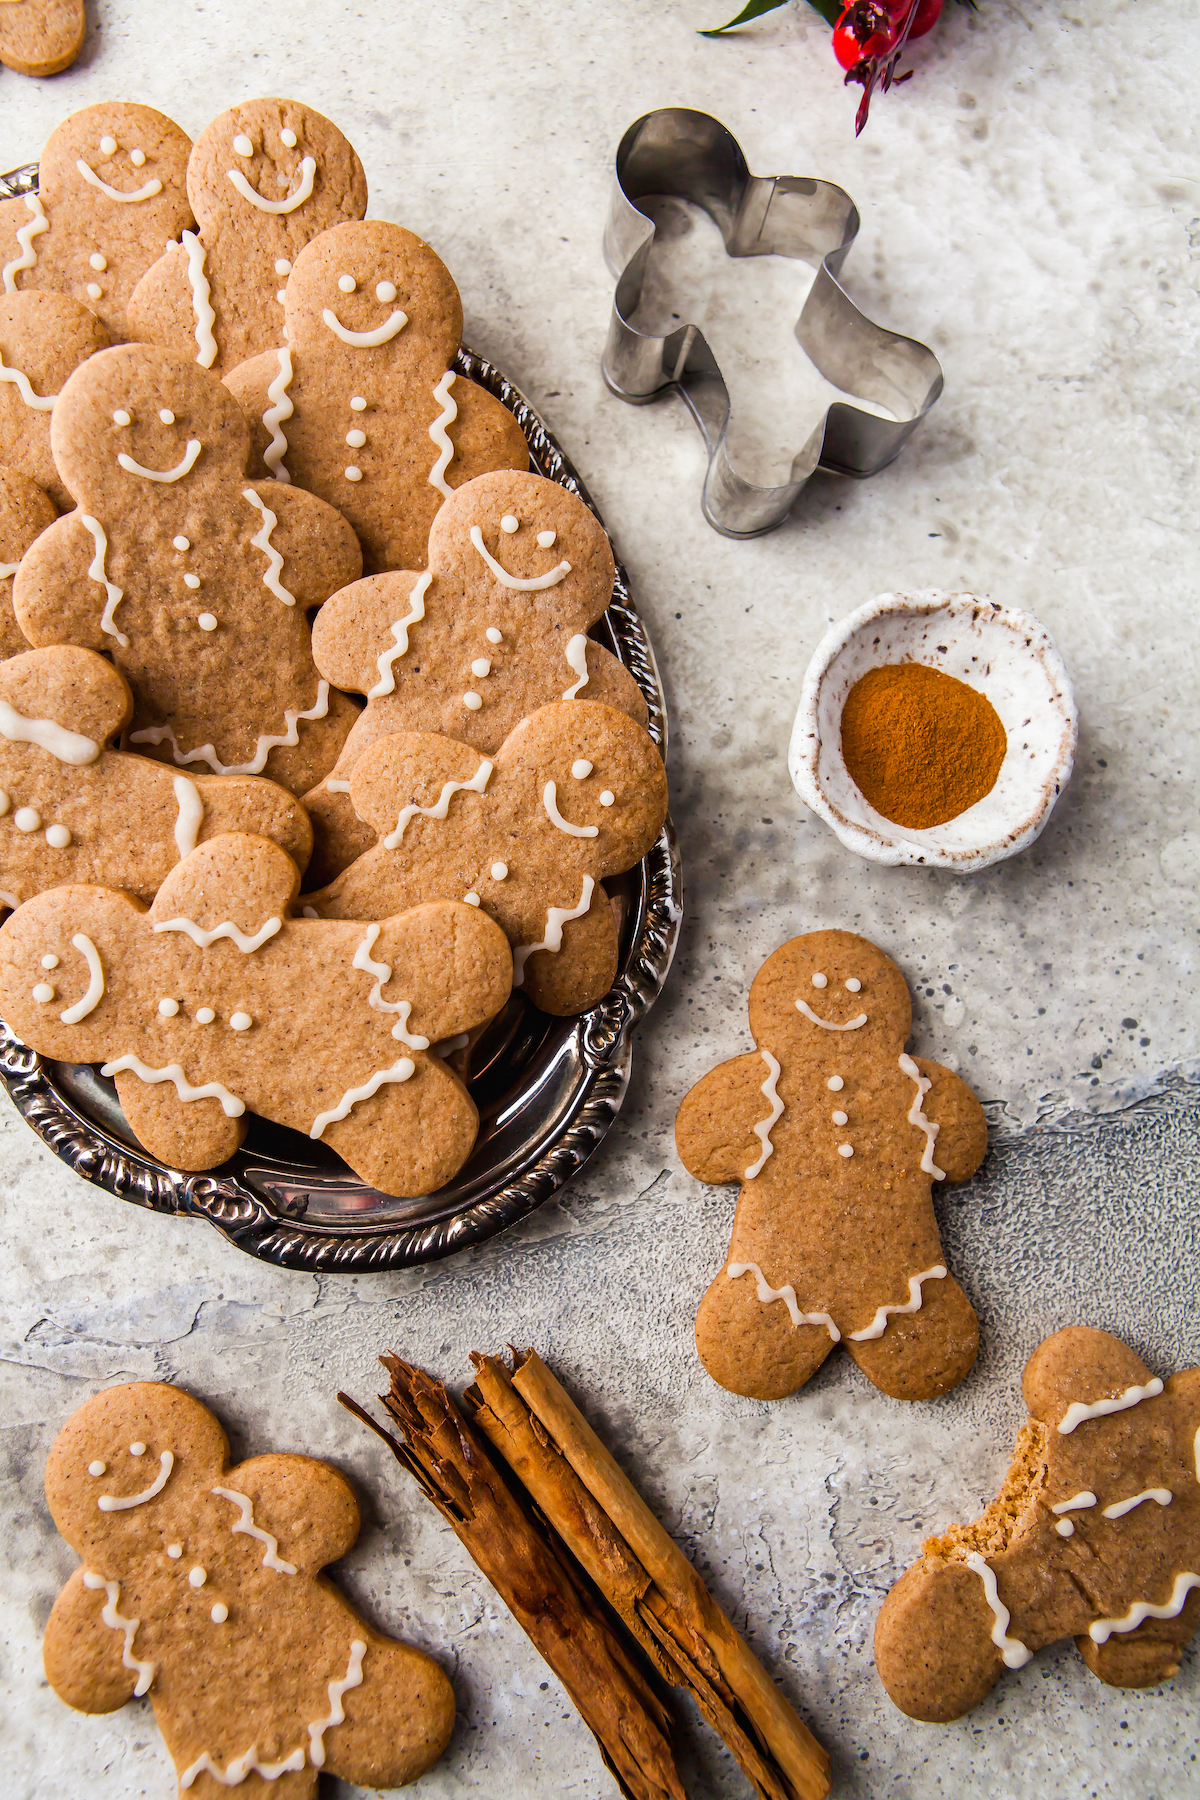 Gingerbread cookies are fanned out on an oval tray. On the table is a rustic dish of ground cinnamon, a cookie cutter, a completed gingerbread man, and some cinnamon sticks.